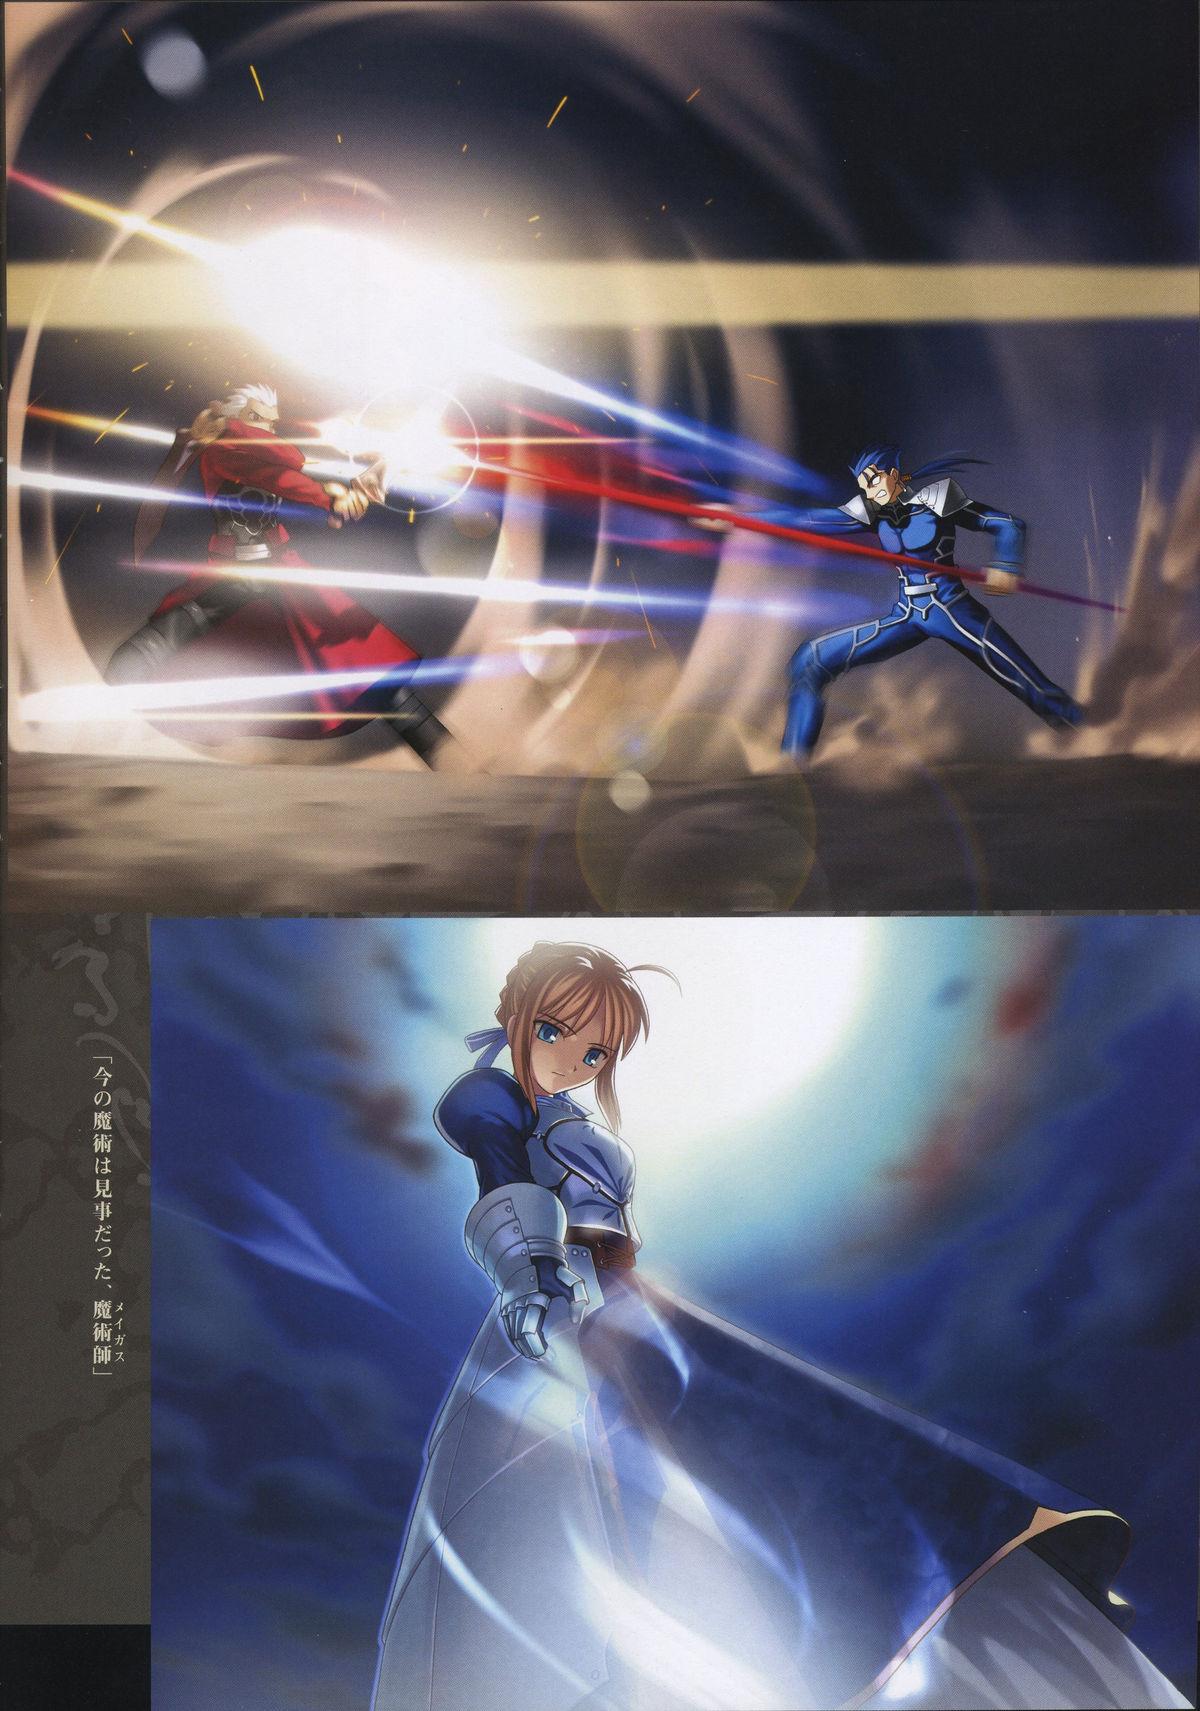 Fate/complete material I - Art material. 11